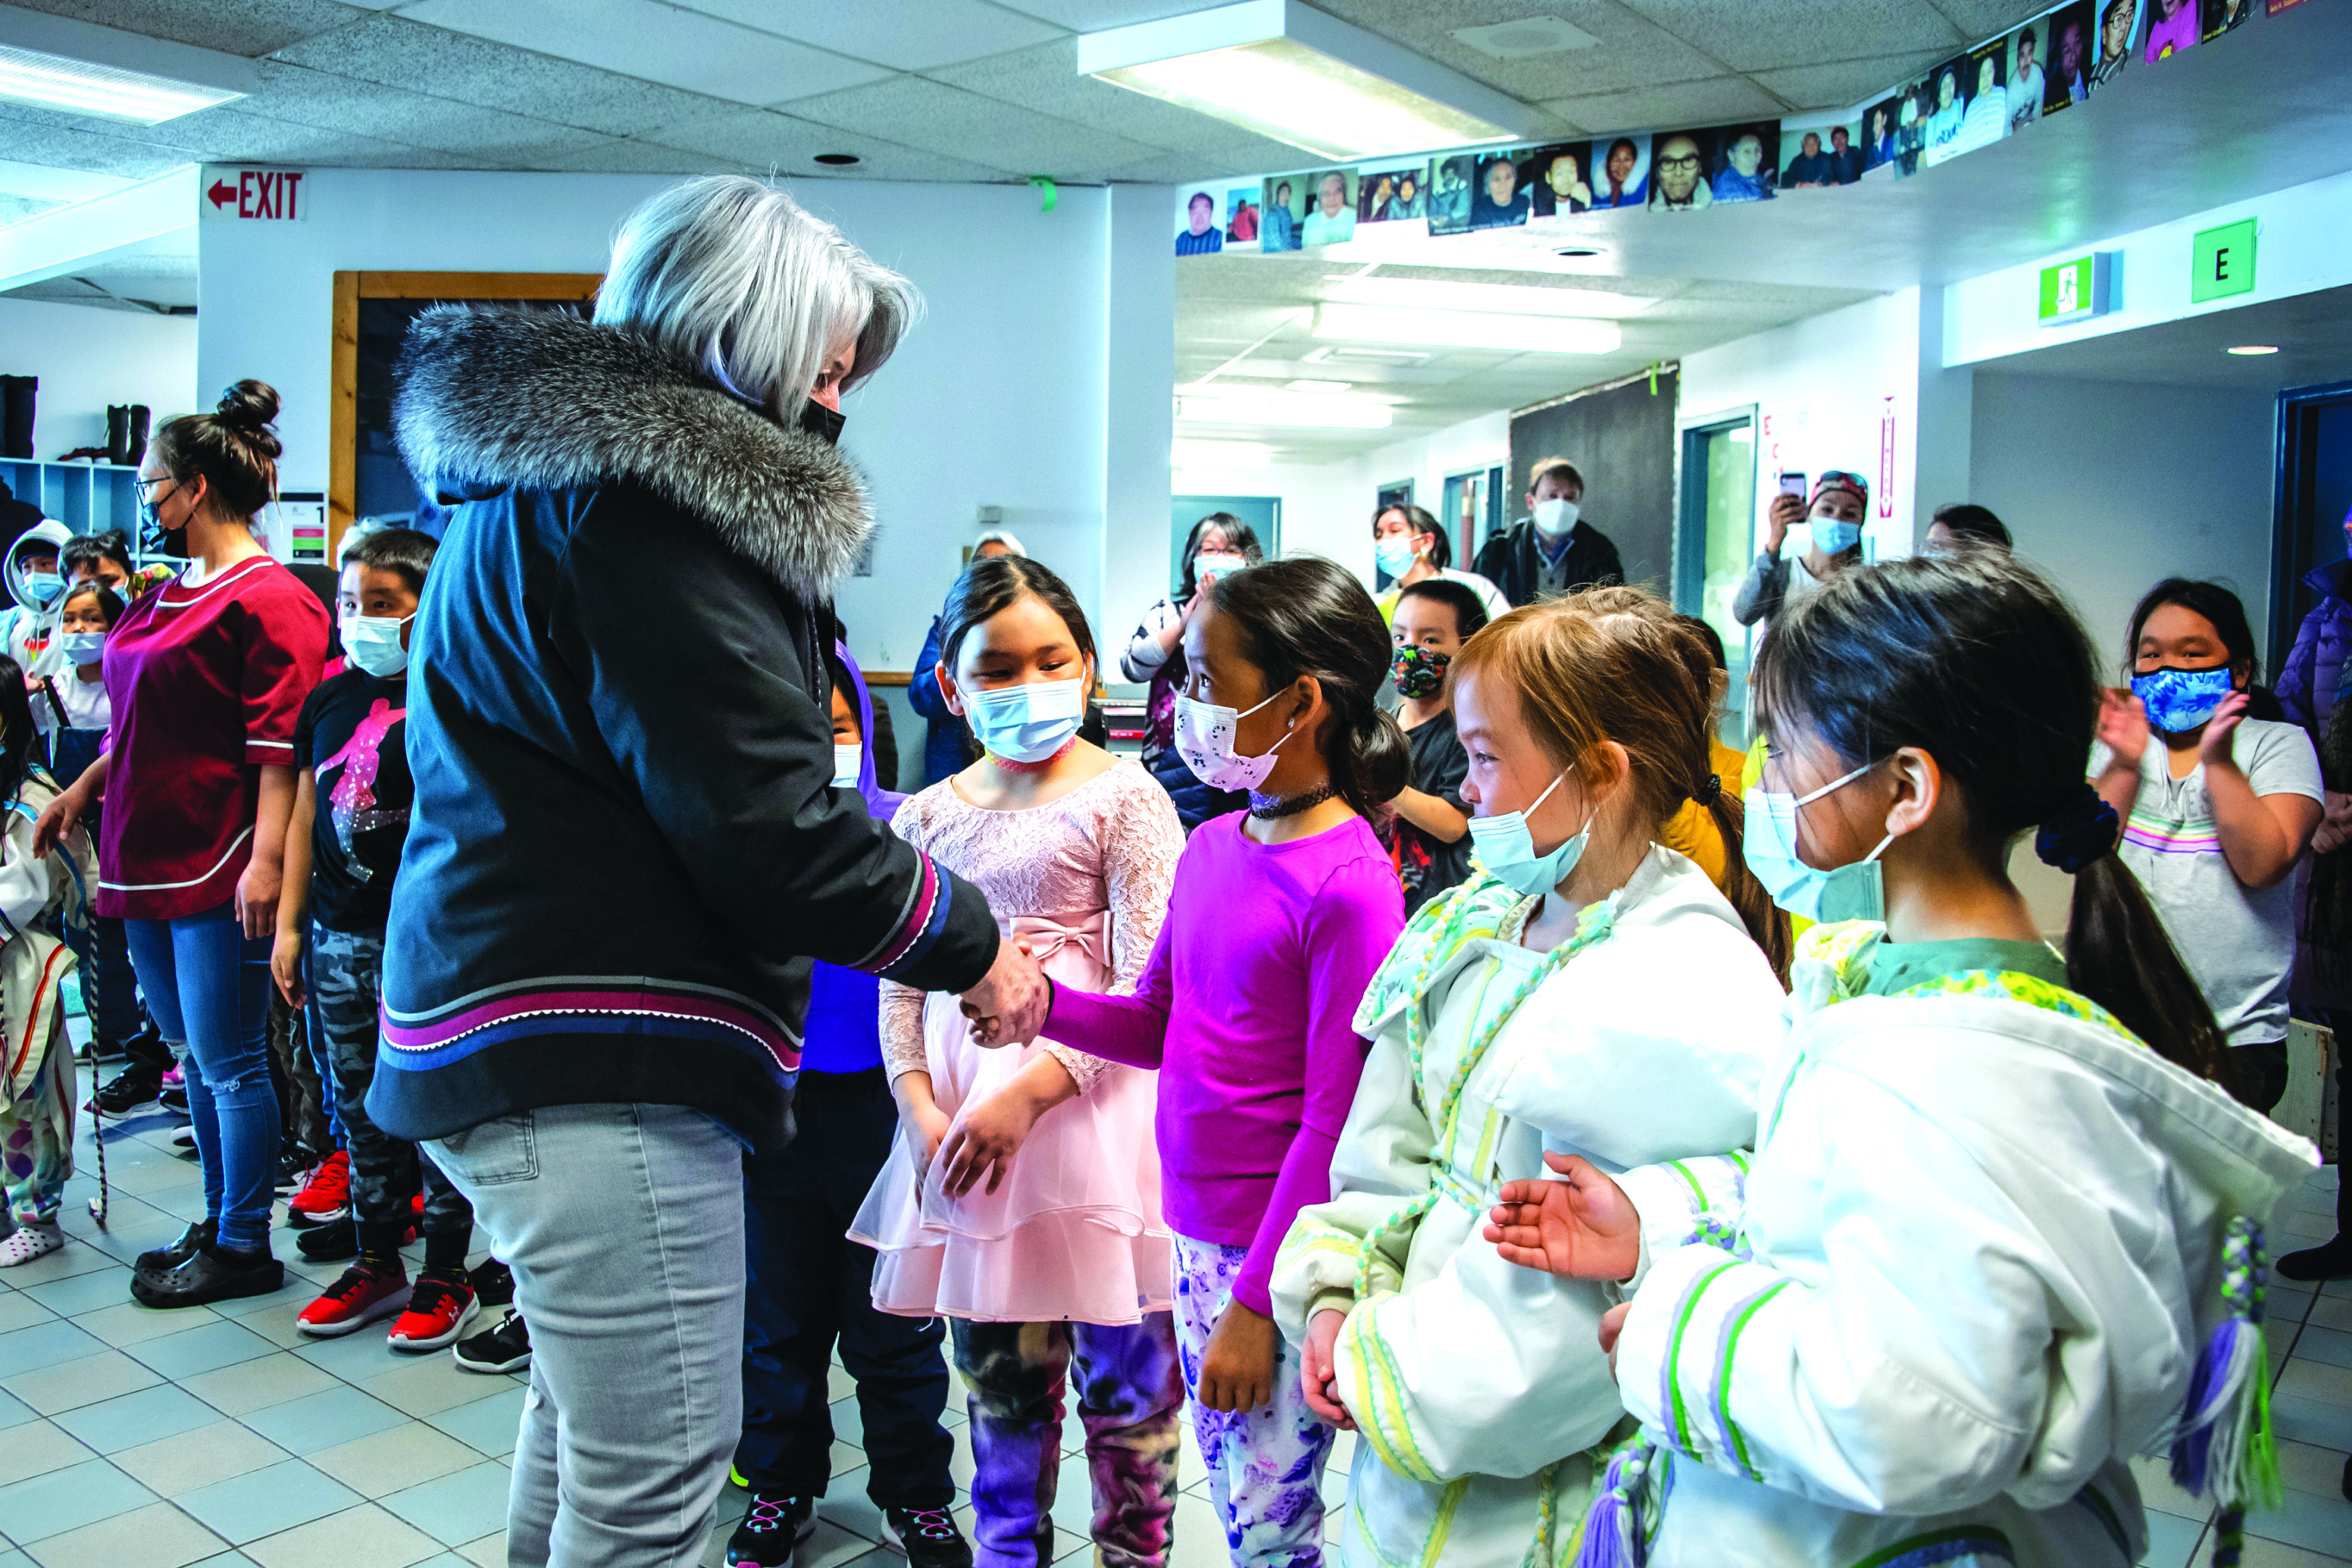 The Governor General and Whit Fraser visited schools in Nunavik in May. (Photo by Sgt. Mathieu St-Amour/Rideau Hall)